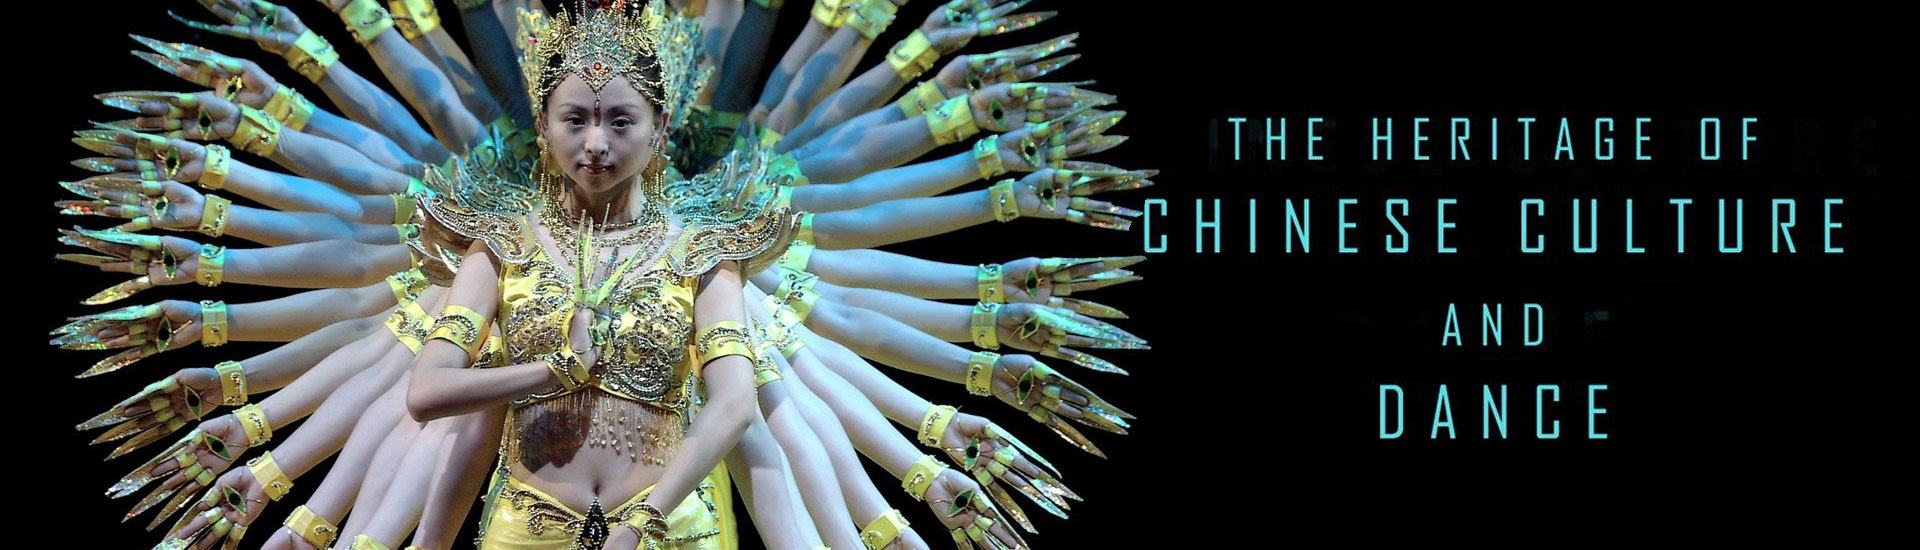 The Heritage of Chinese Culture and Dance